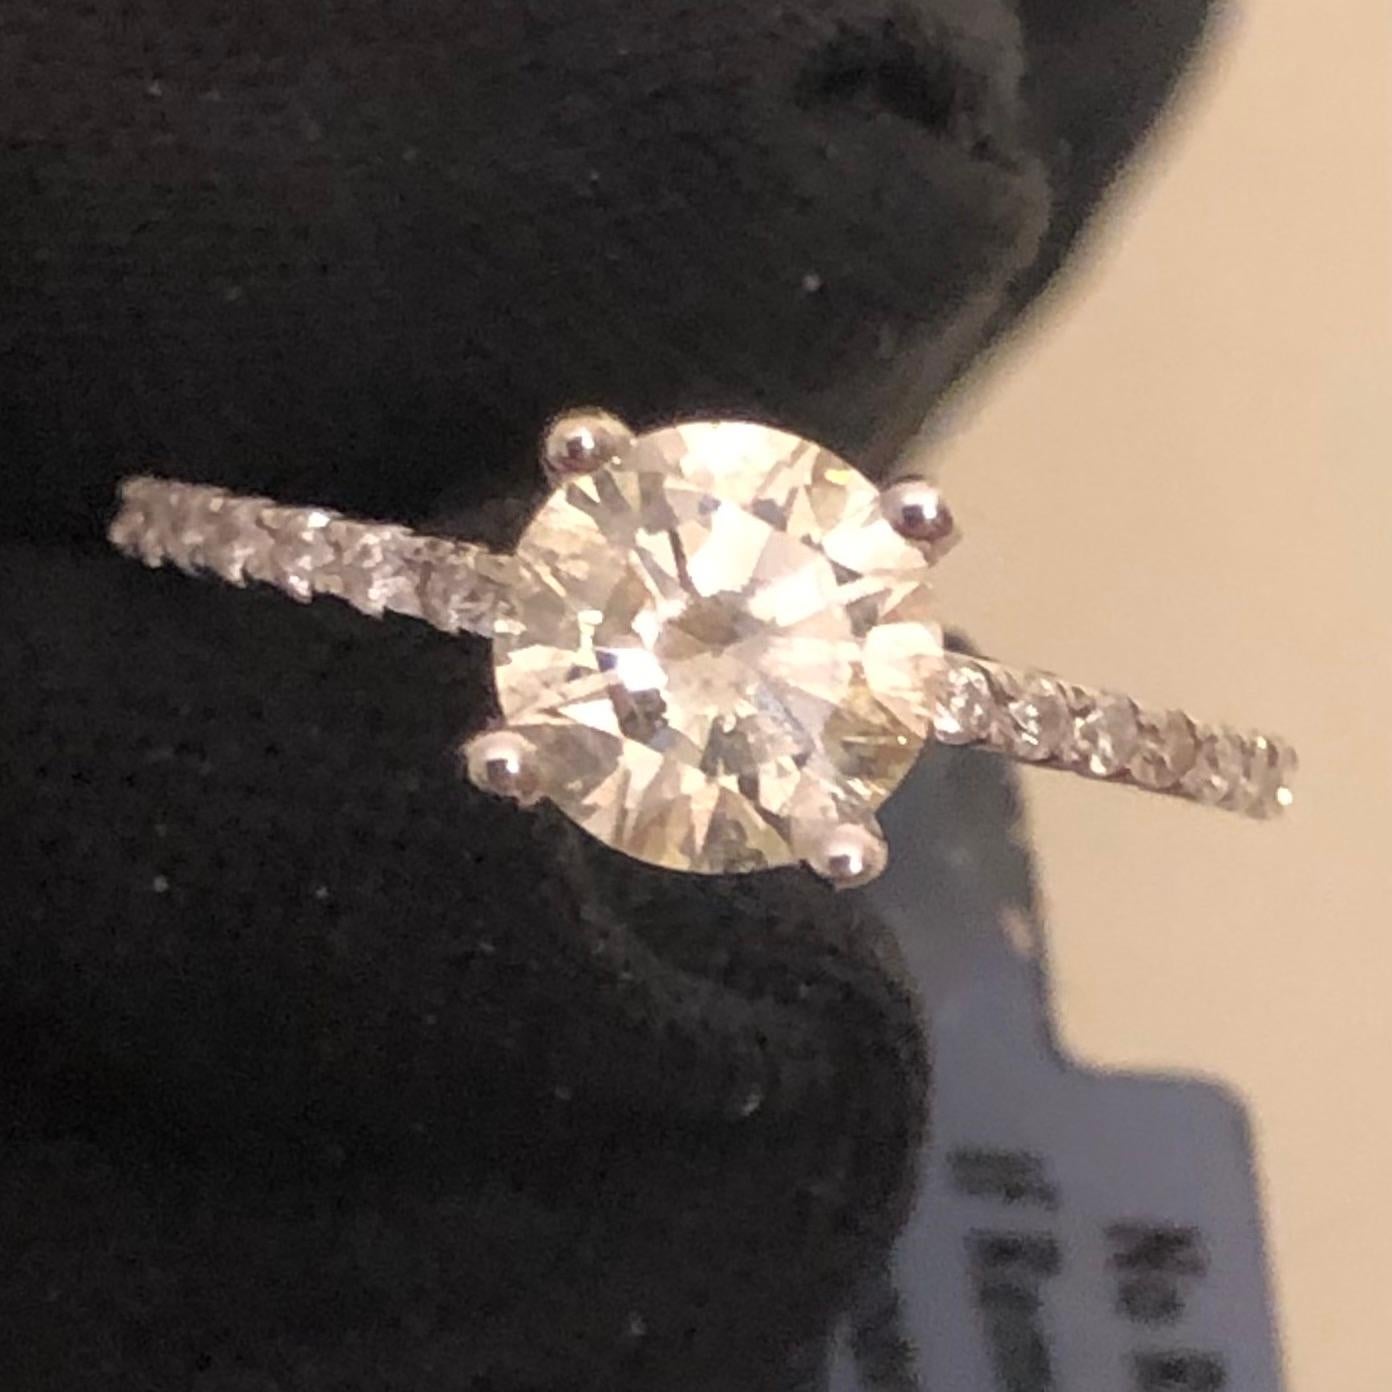 Classic 1 1/3 Ct brilliant round solitaire diamond halo engagement ring in 14k white gold. The center natural diamond is certified by GAI with an appraisal value of $4,125.00.

An over 1 carat solitaire round diamond, graded SI3 clarity (natural